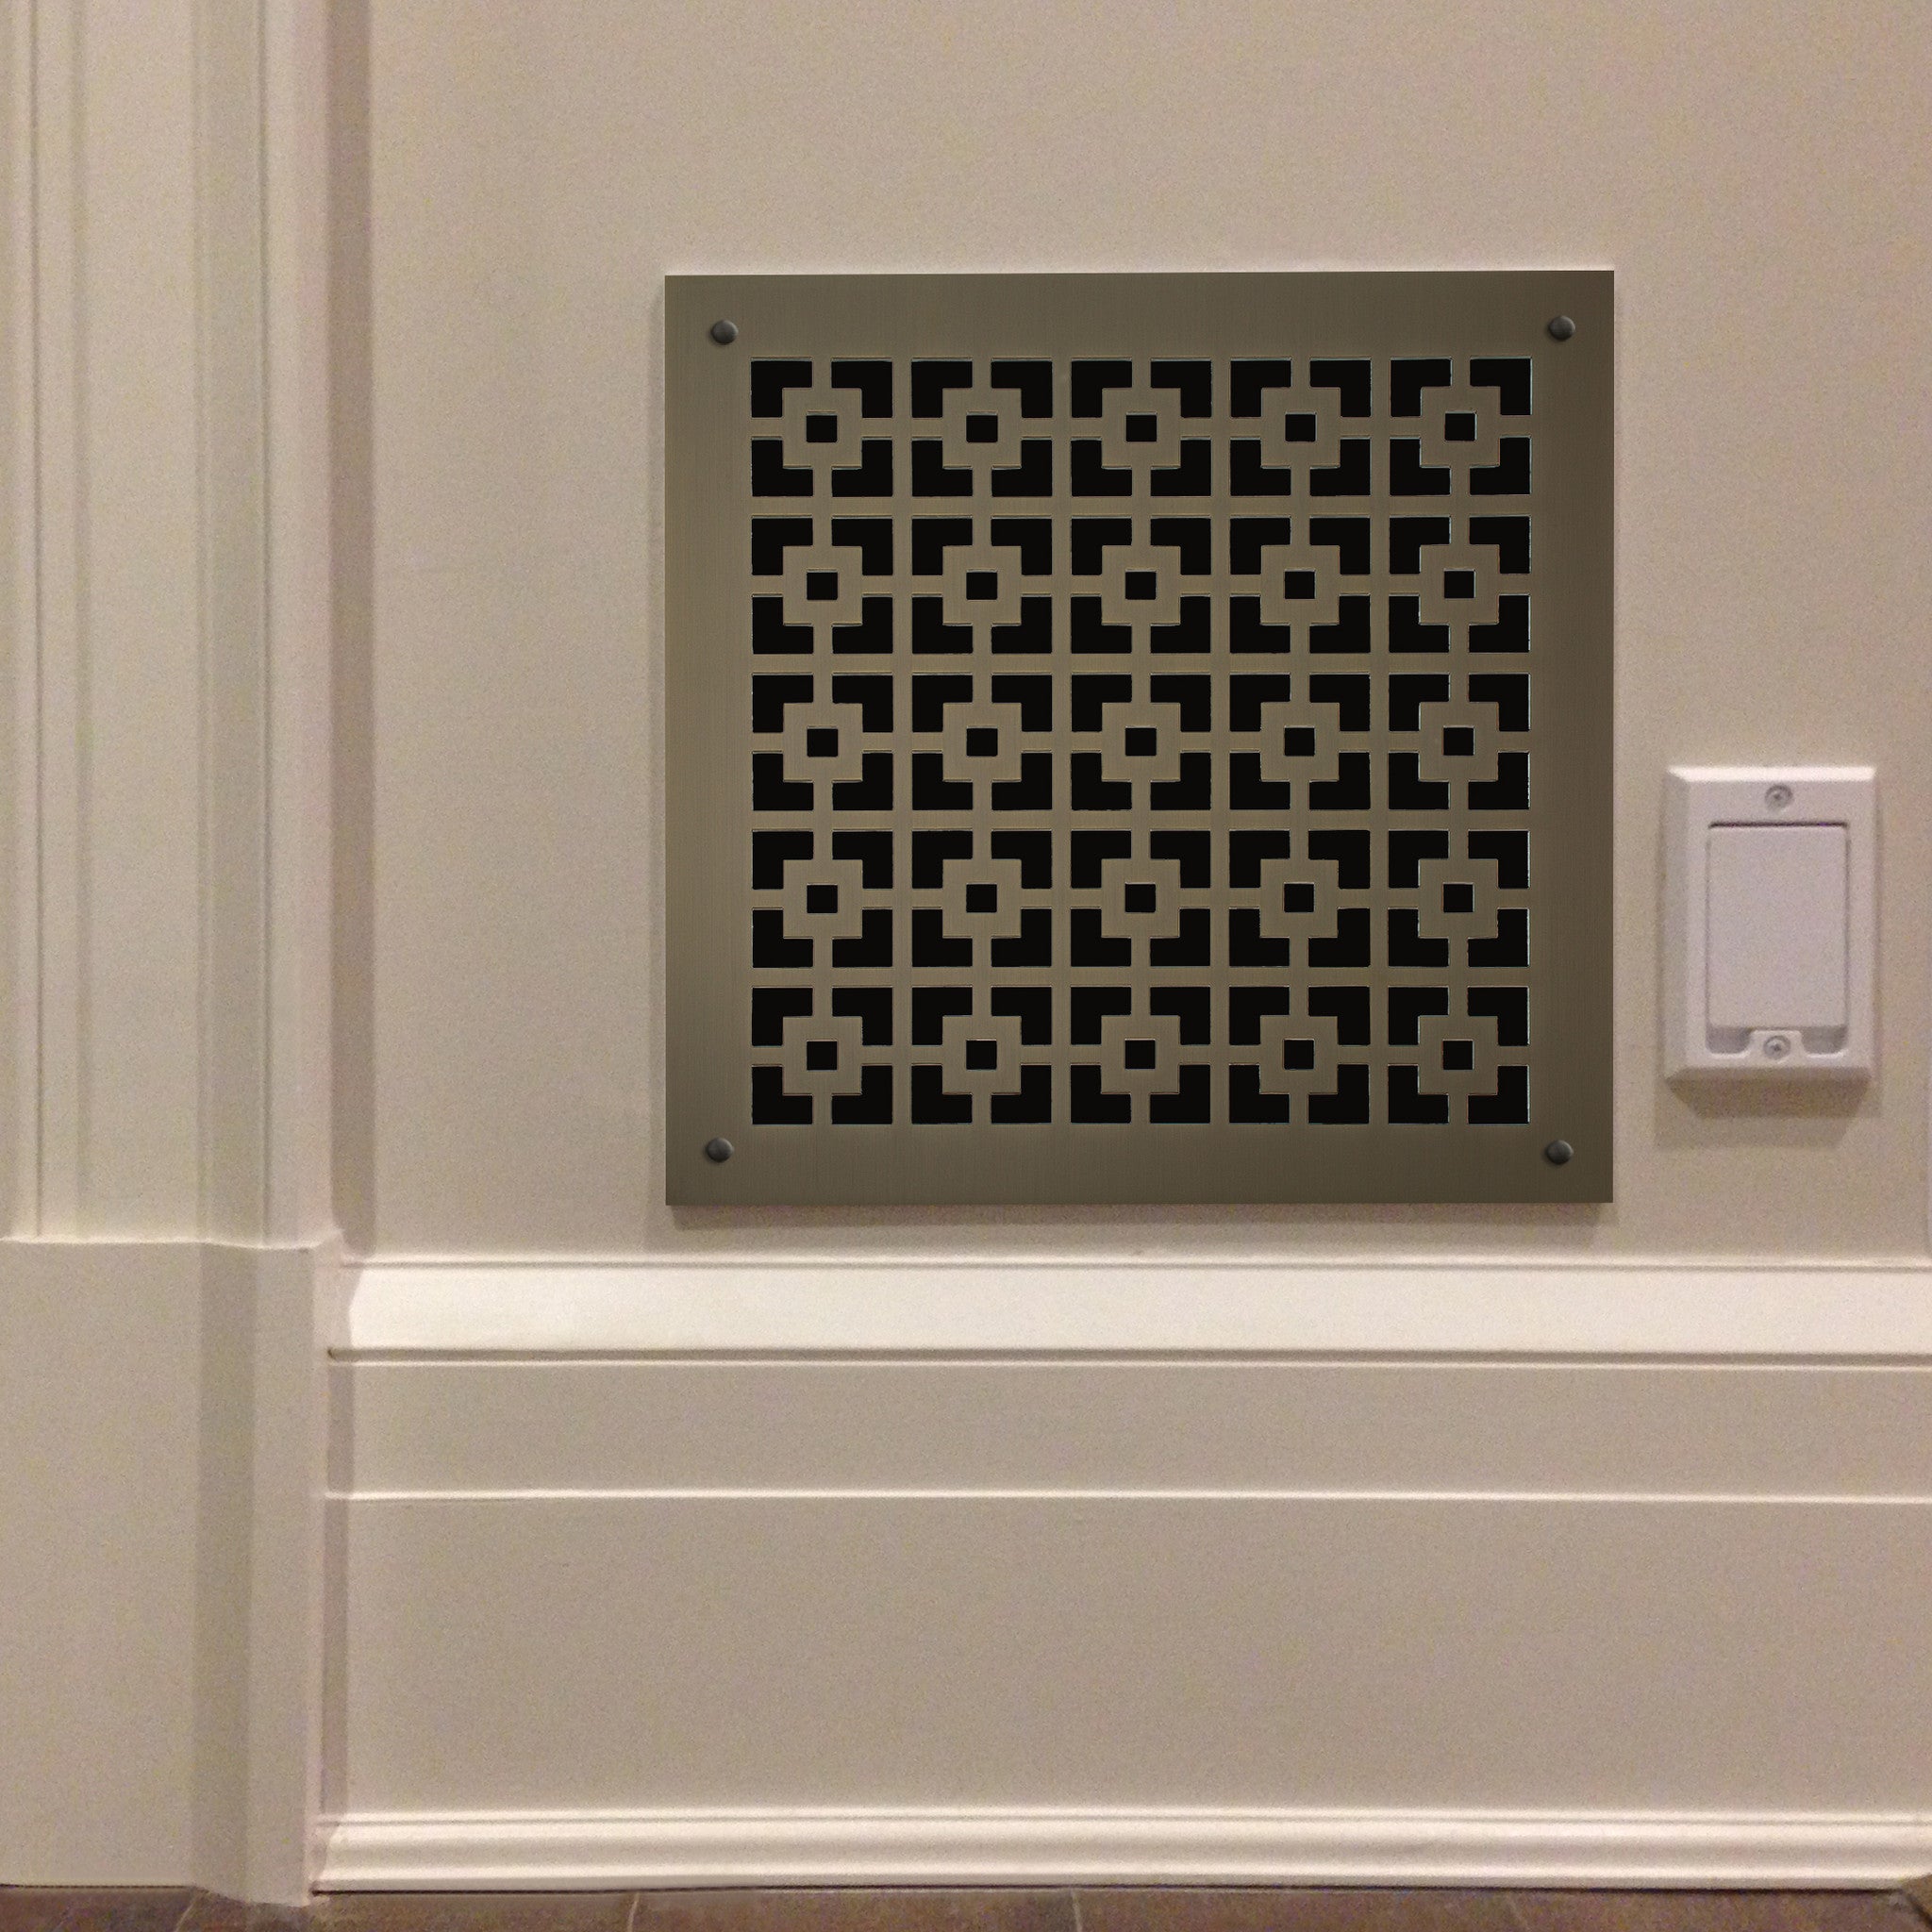 200 Square Link Perforated Grille: 1¾” pattern - 49% open area